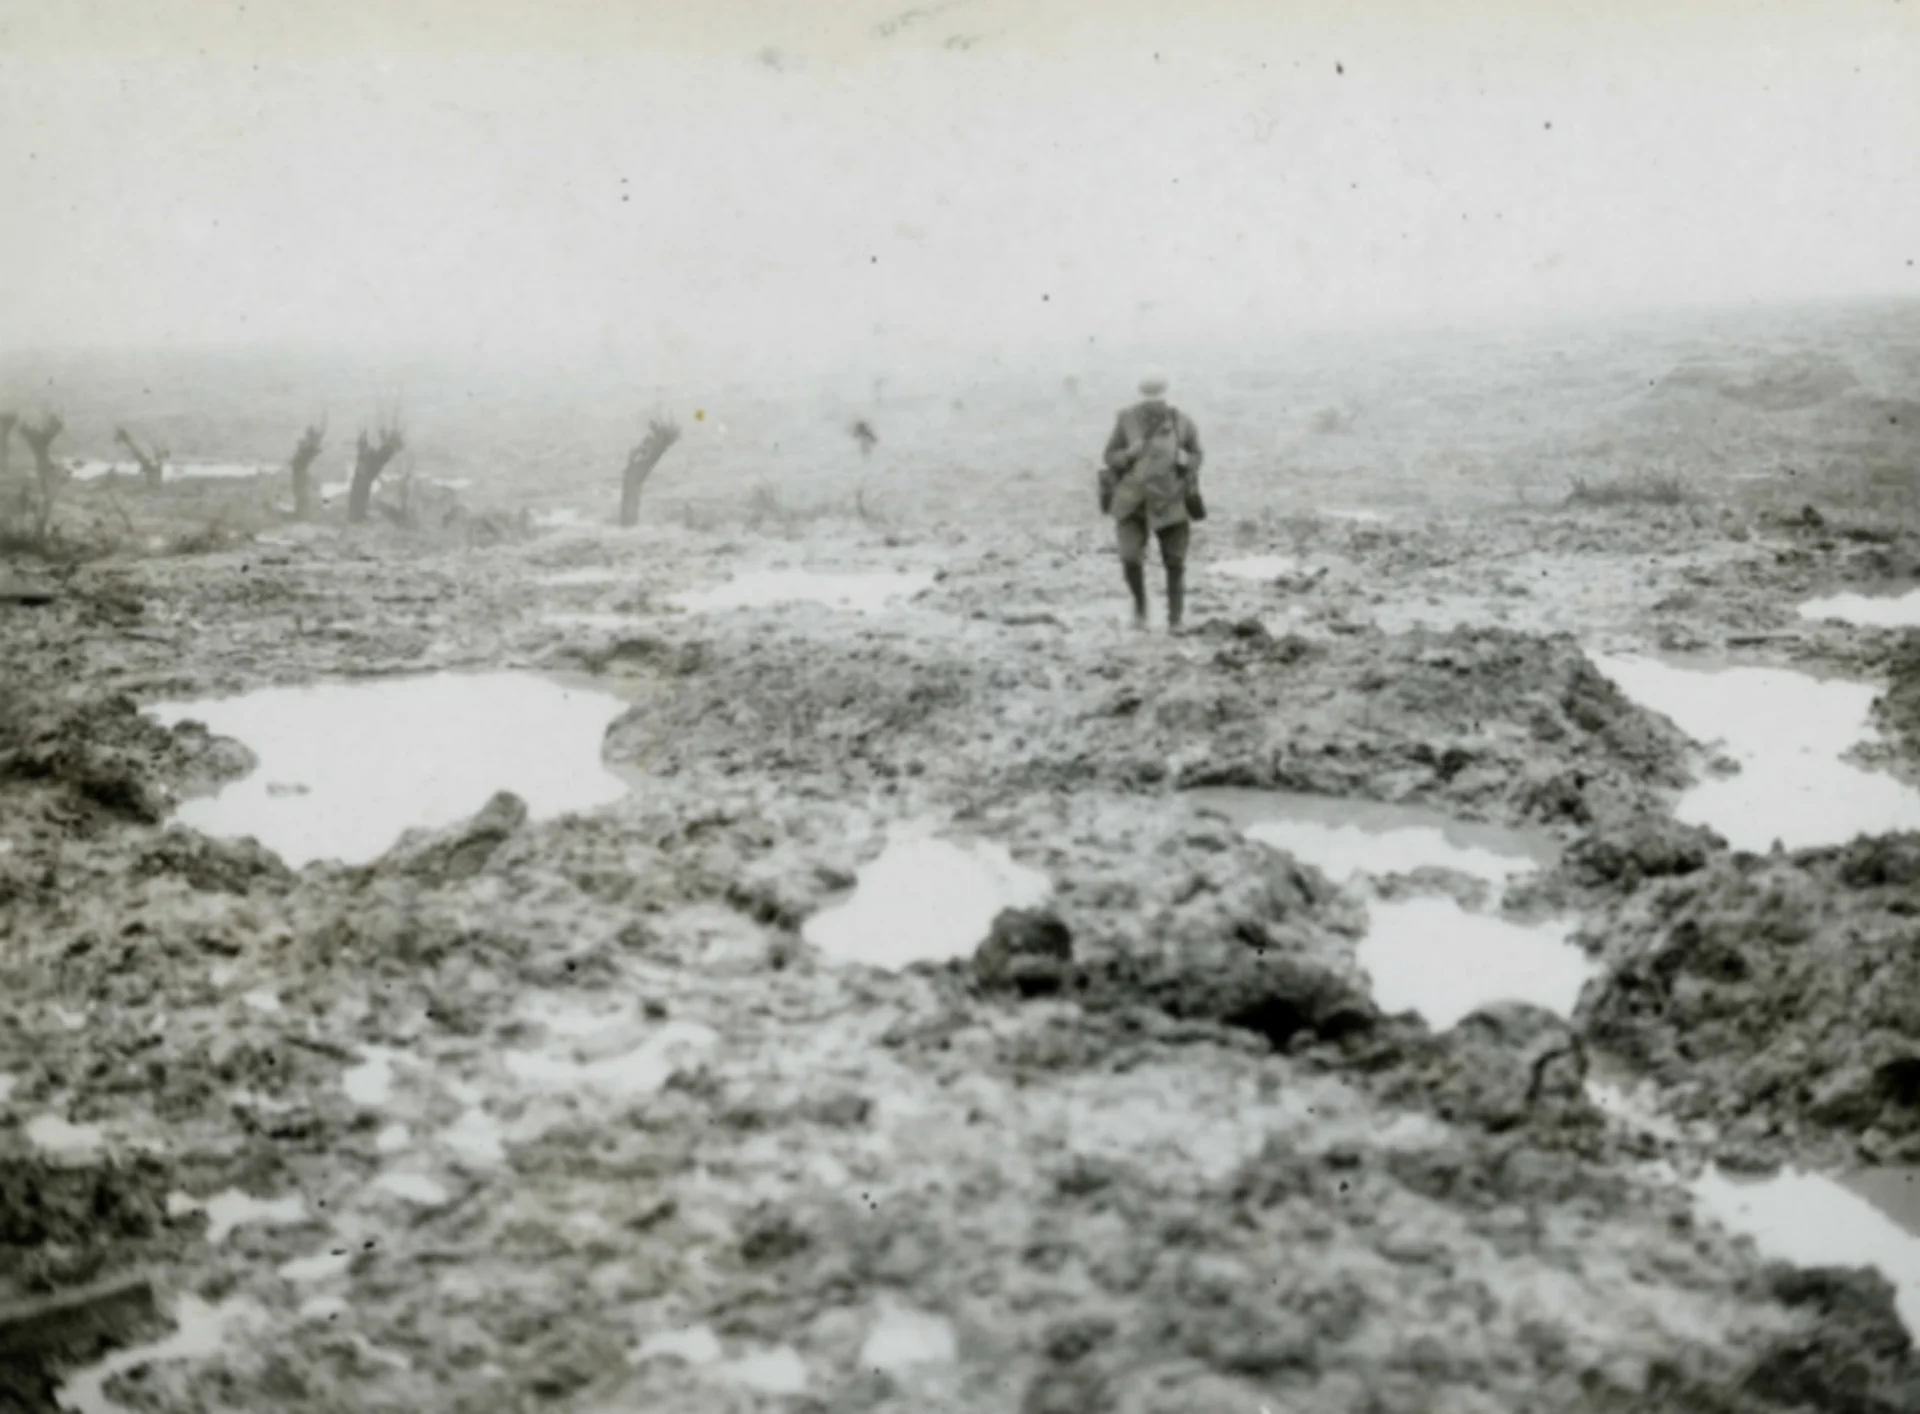 The unbearable weather conditions of First World War